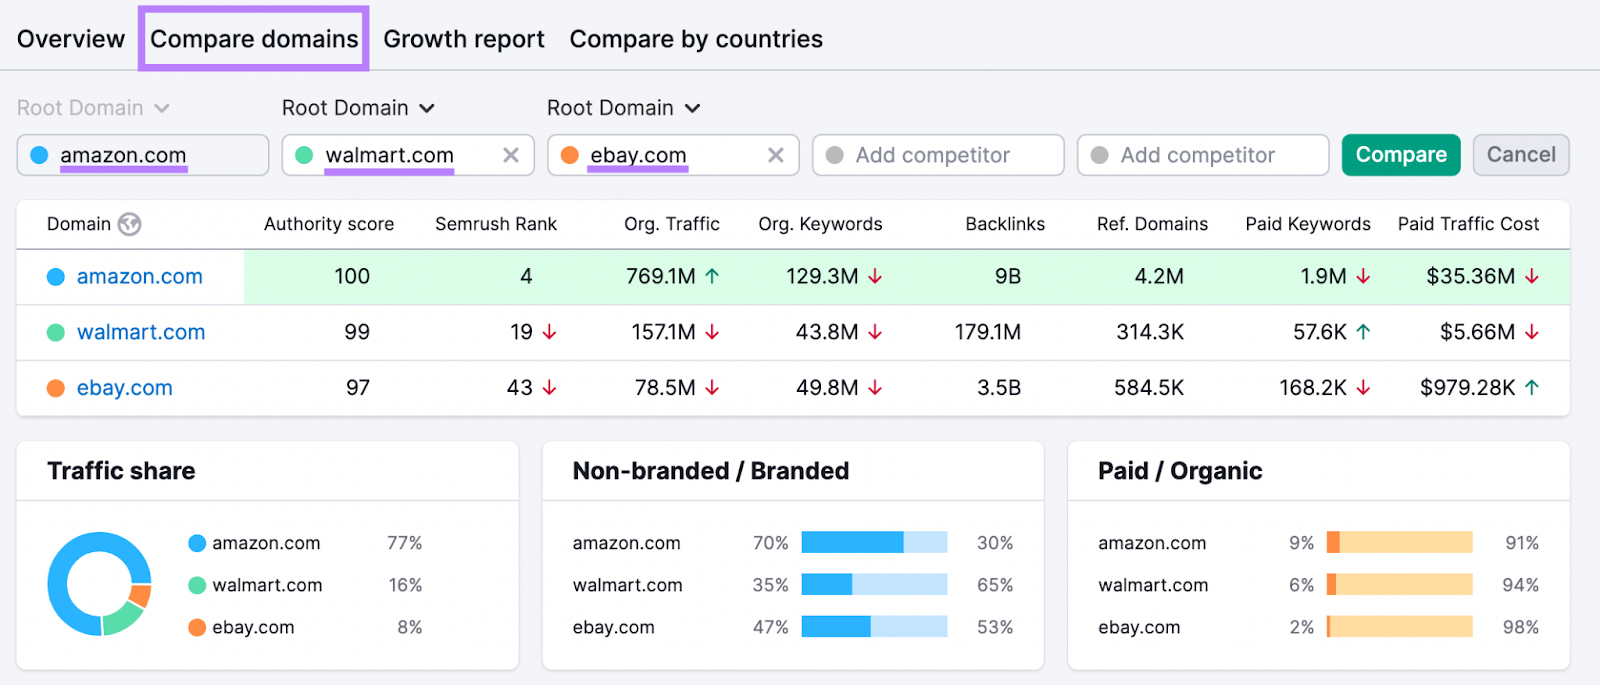 “Compare domains” view in Domain Overview